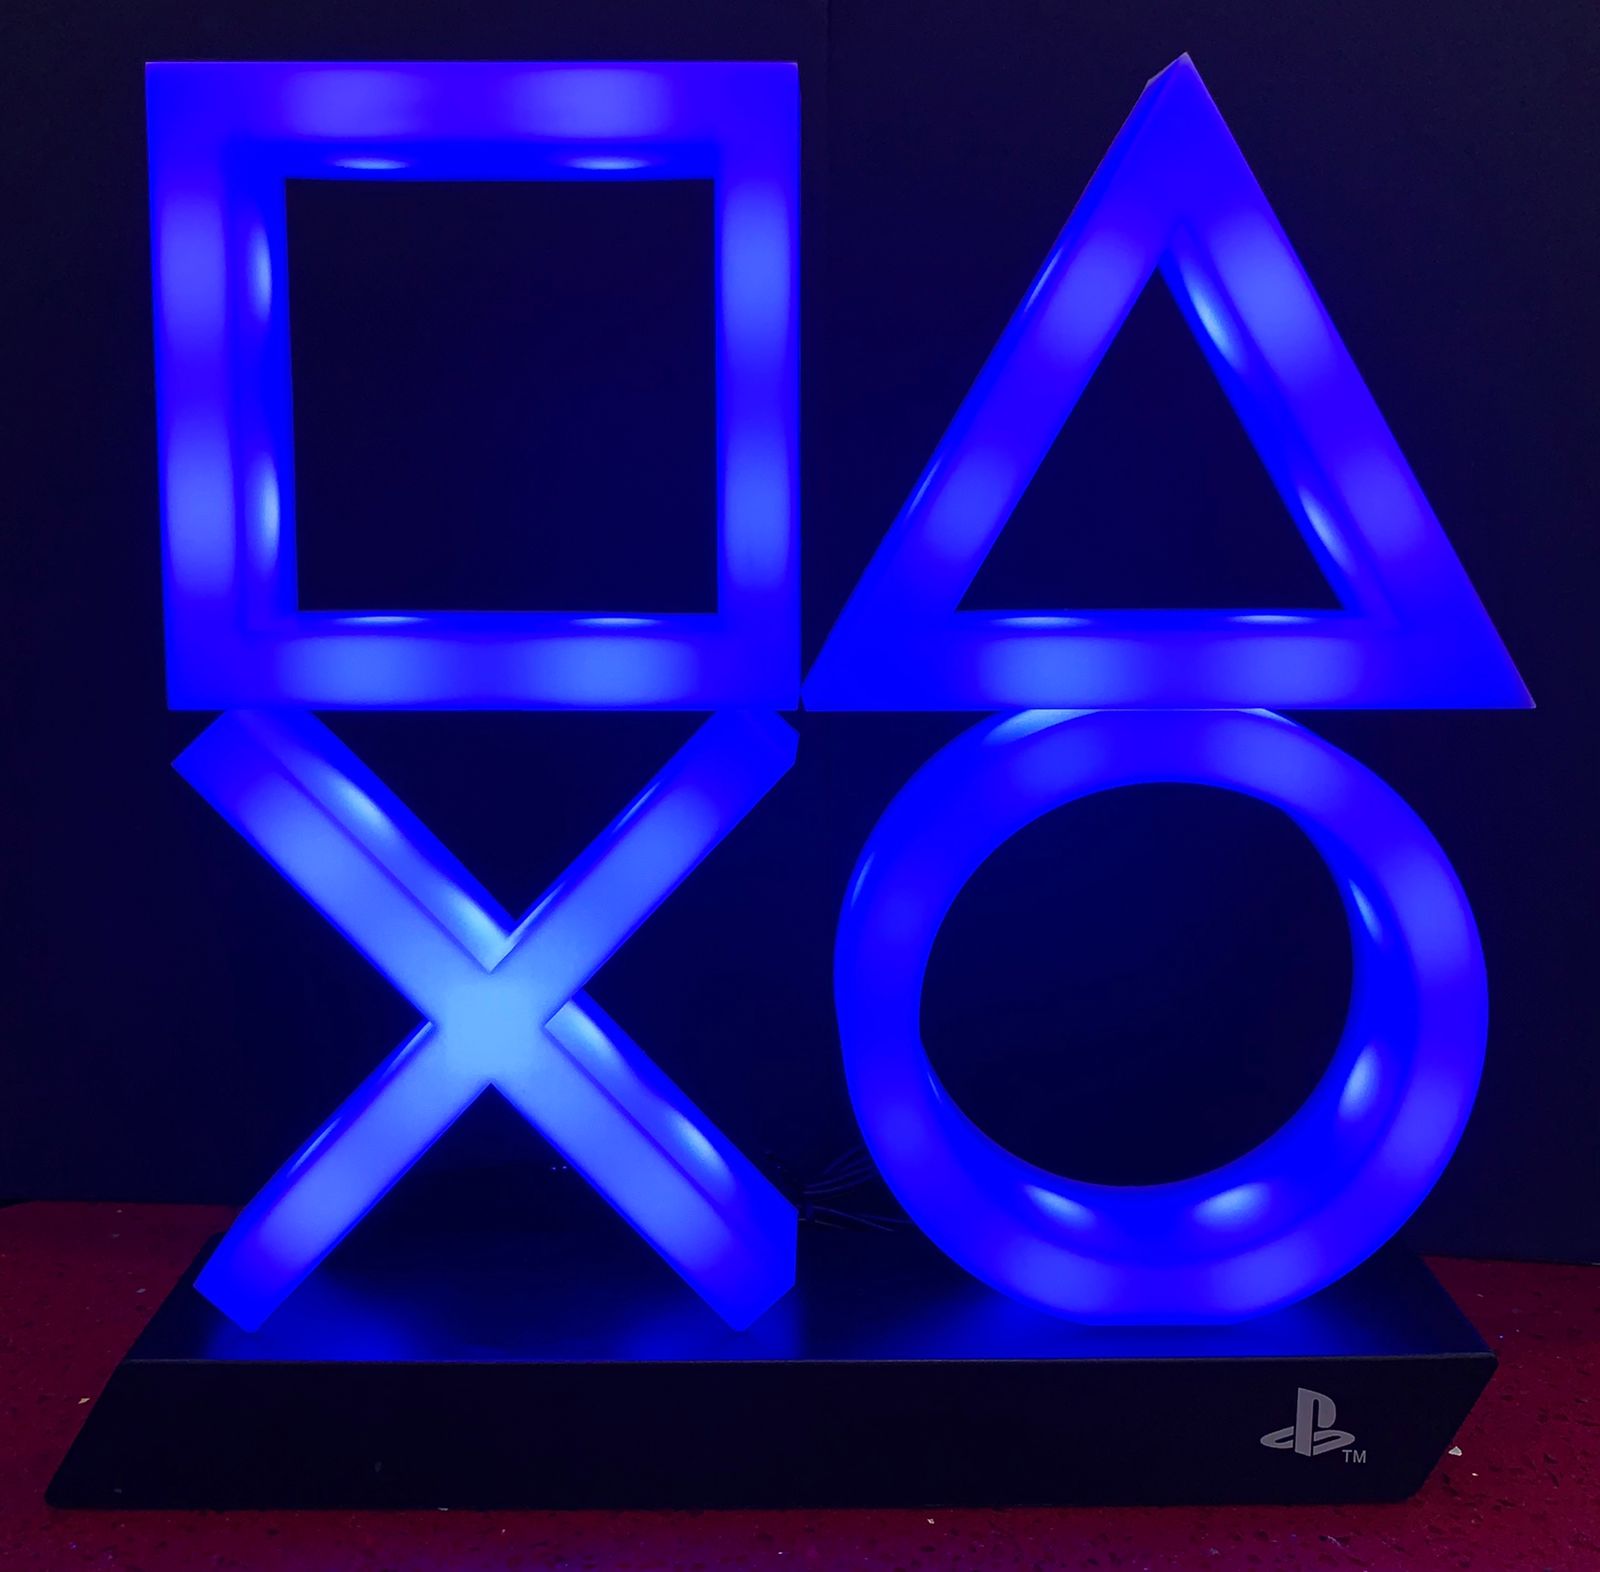 LAMPE LED SONY PLAYSTATION ICONS LIGHT PALADONE GAMER DECO PS4 PS5